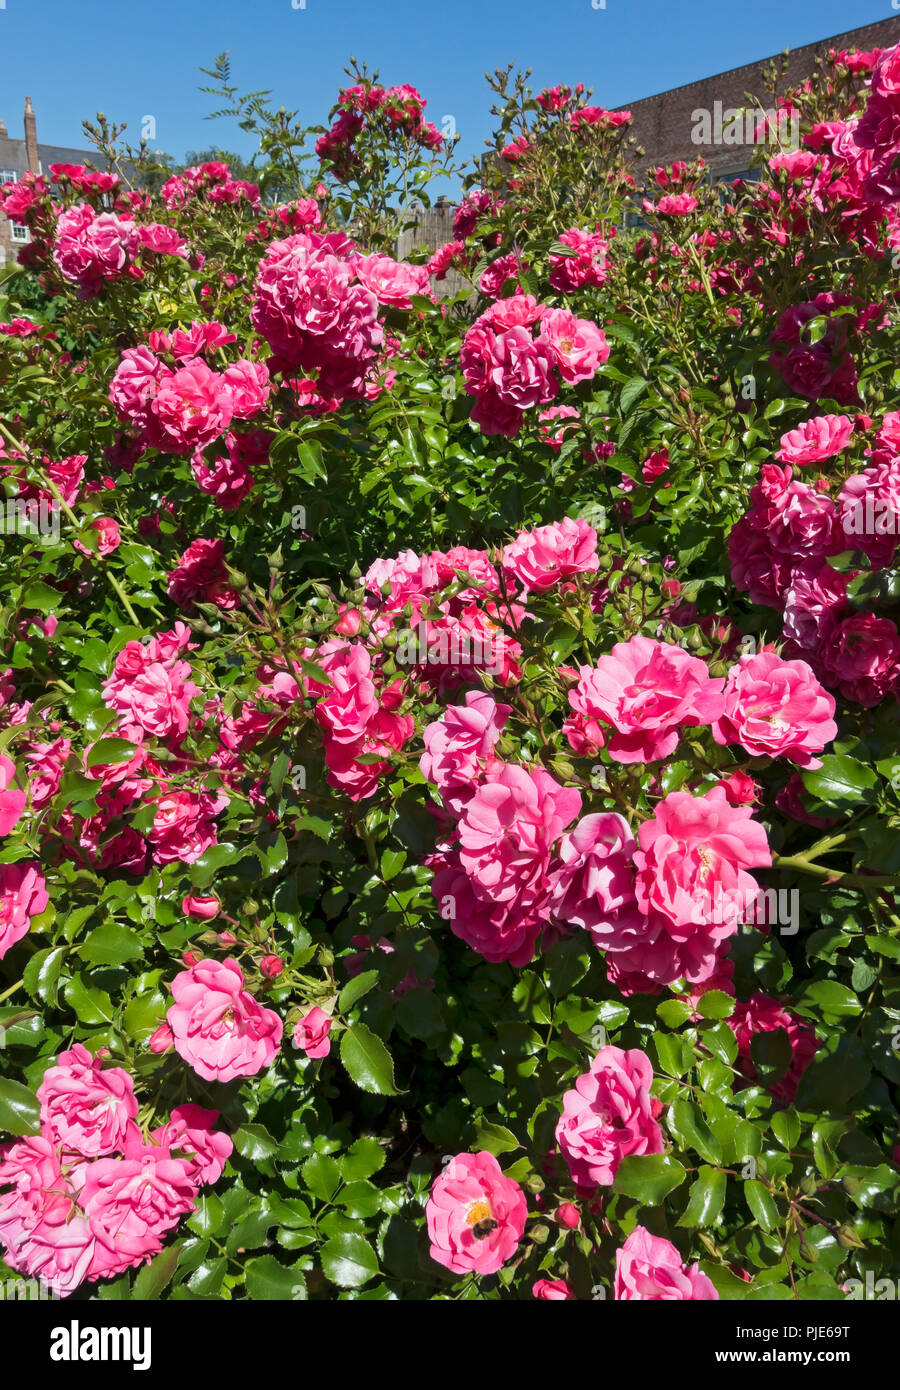 Close up of pink roses rose 'Pink flower carpet' flower flowers flowering in a garden in summer England UK United Kingdom GB Great Britain Stock Photo